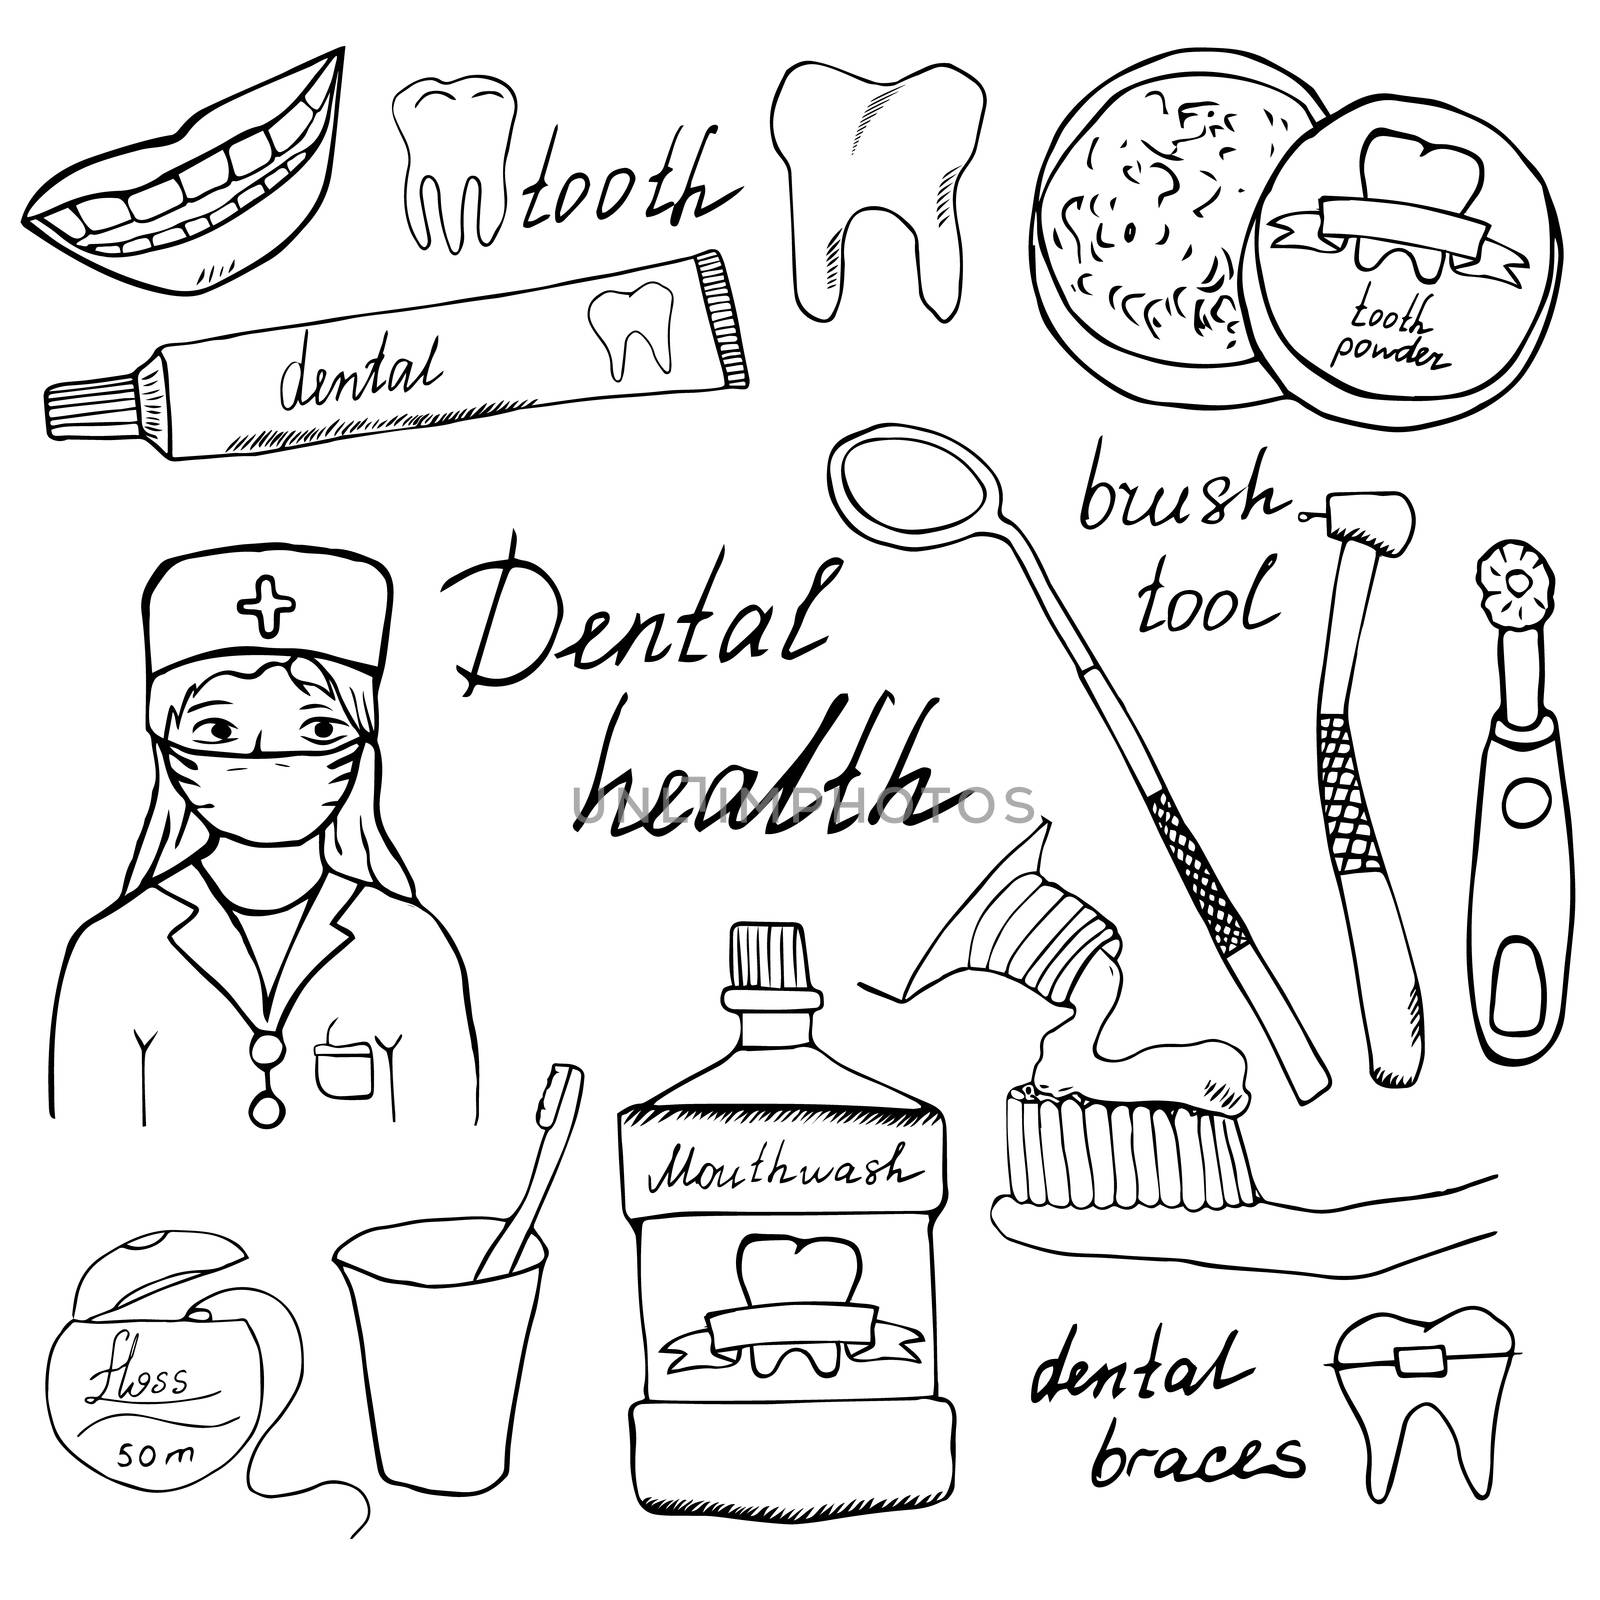 Dental health doodles icons set. Hand drawn sketch with teeth, toothpaste toothbrush dentist mouth wash and floss. vector illustration isolated by Lemon_workshop